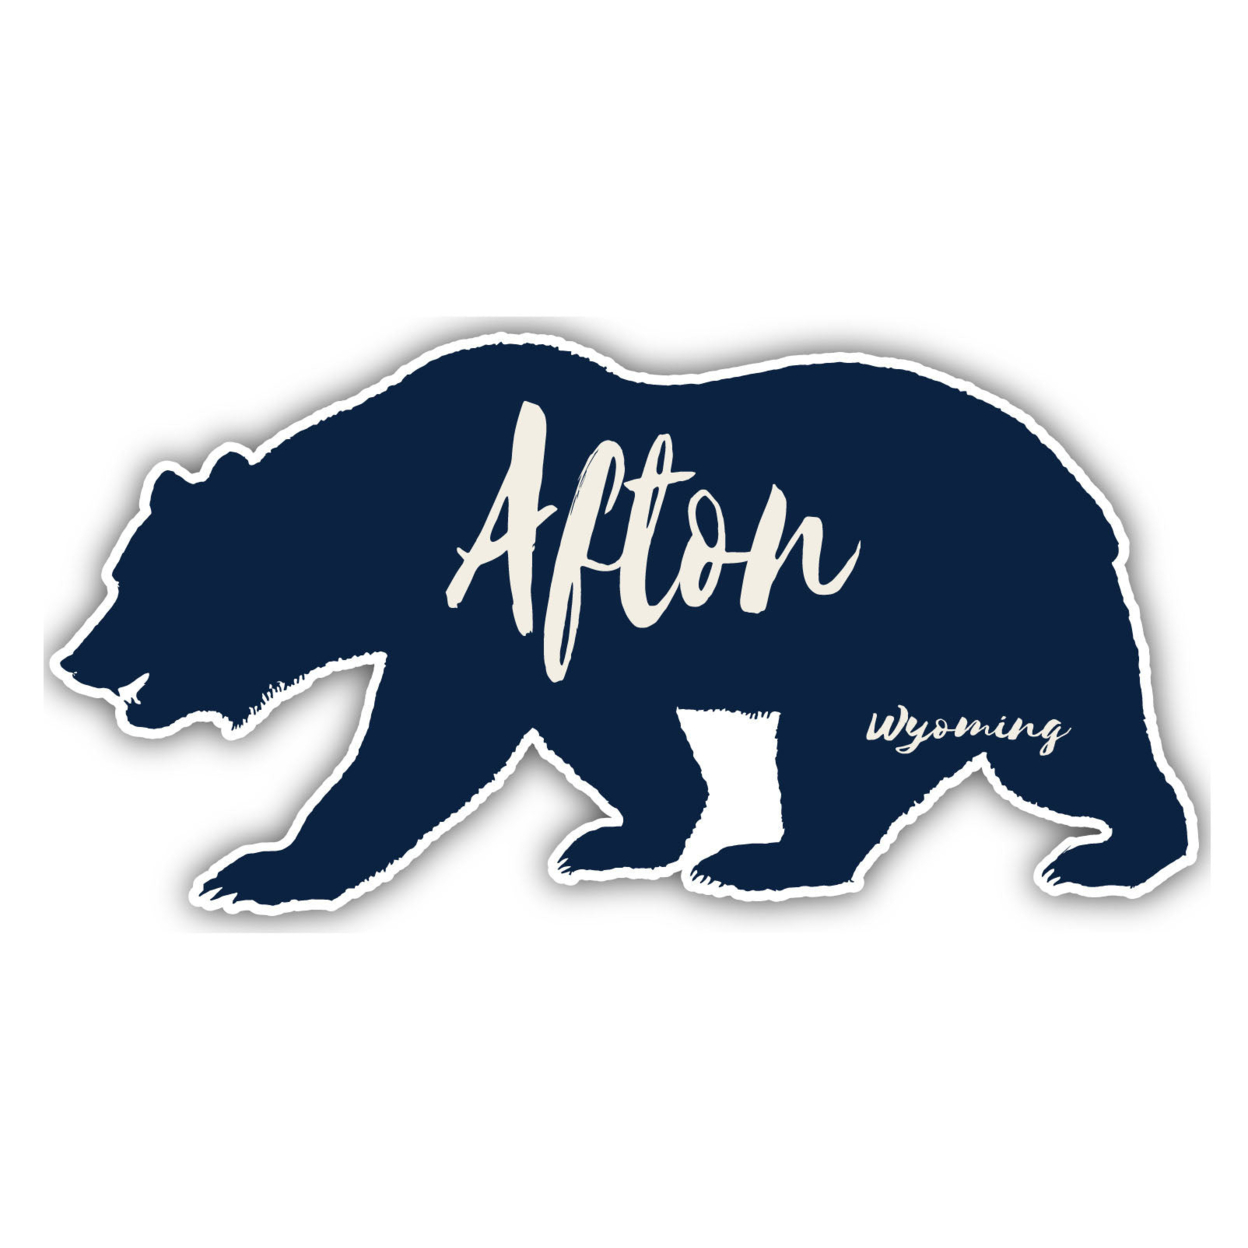 Afton Wyoming Souvenir Decorative Stickers (Choose Theme And Size) - 4-Pack, 12-Inch, Bear